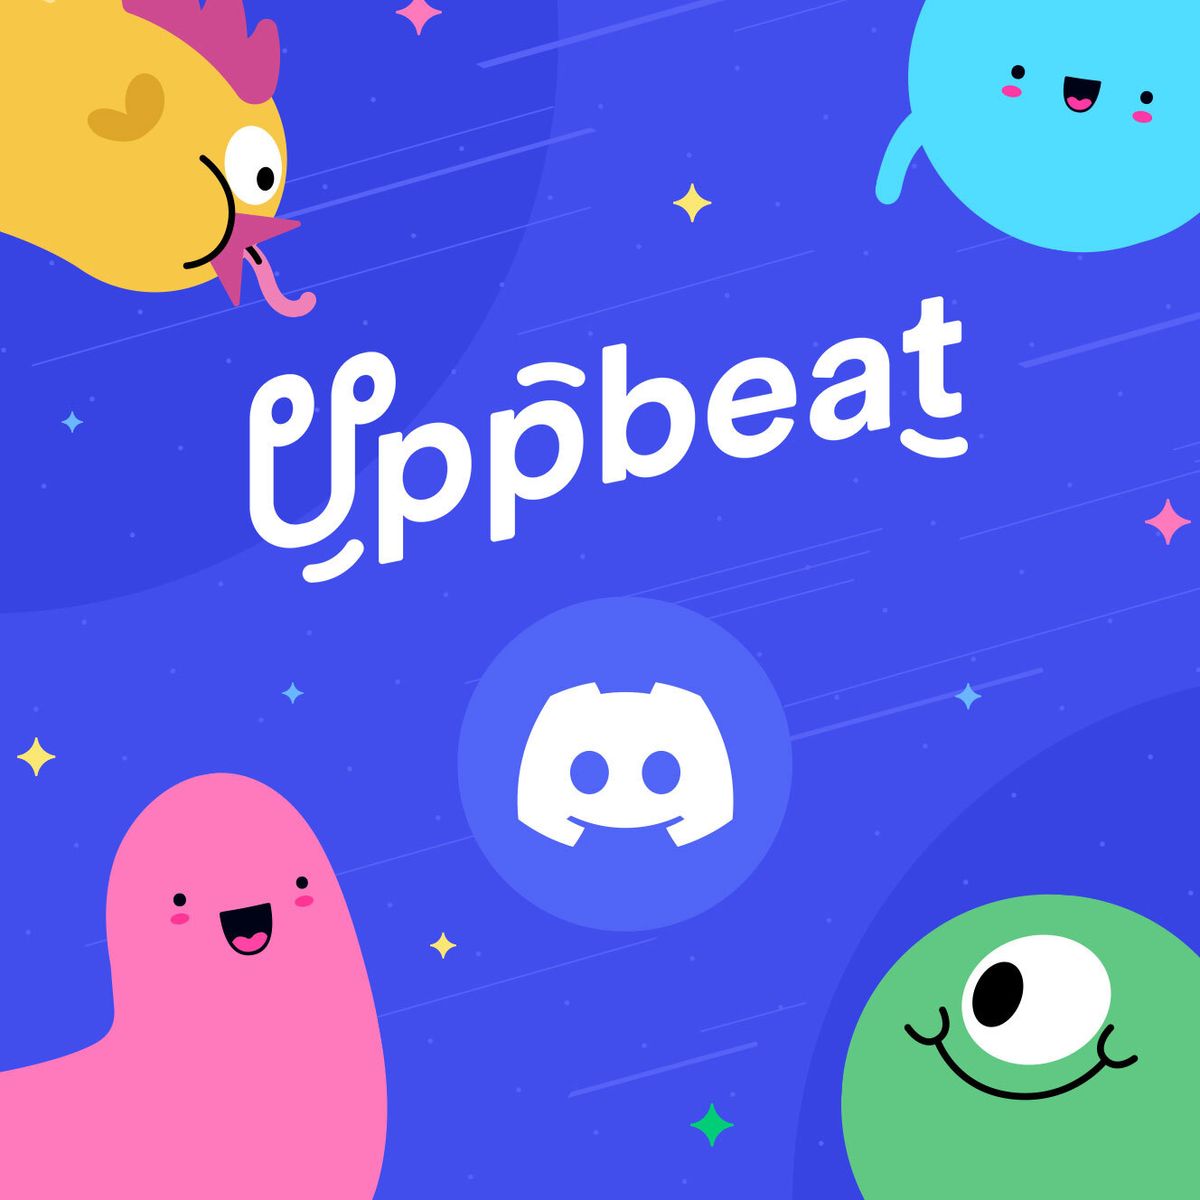 Image to accompany article introducing the Uppbeat server on Discord.